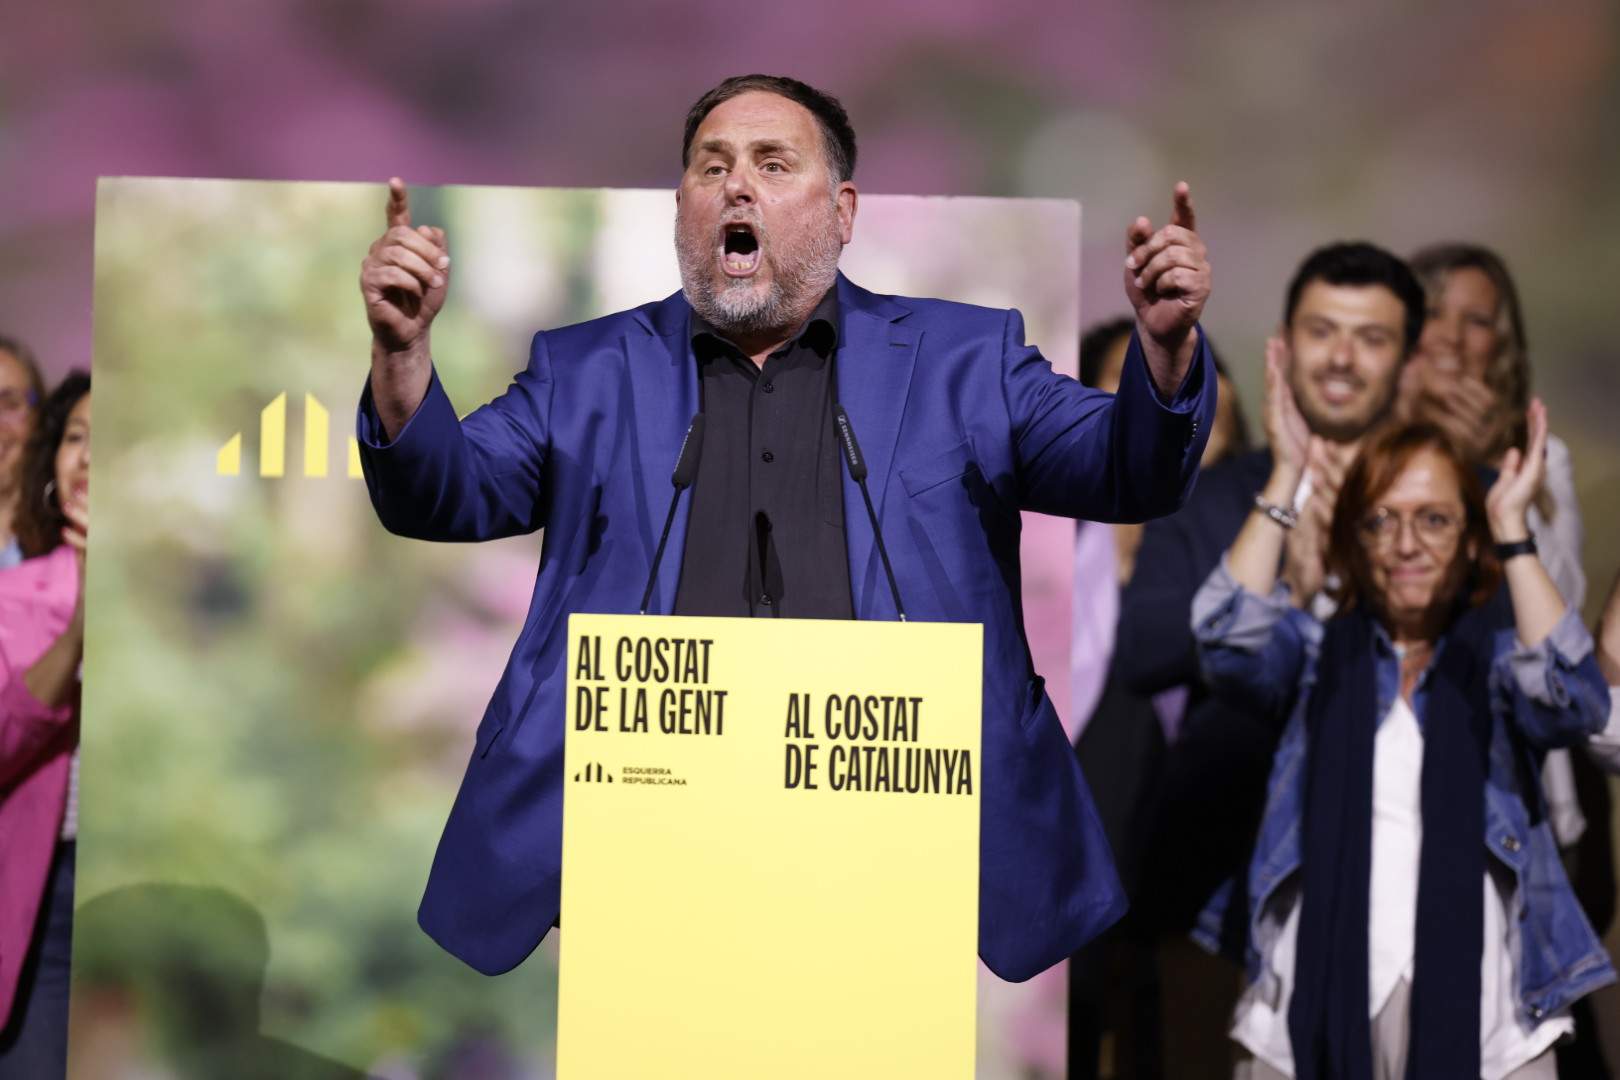 Oriol Junqueras sees himself with the strength to continue leading ERC: "We've understood the message"